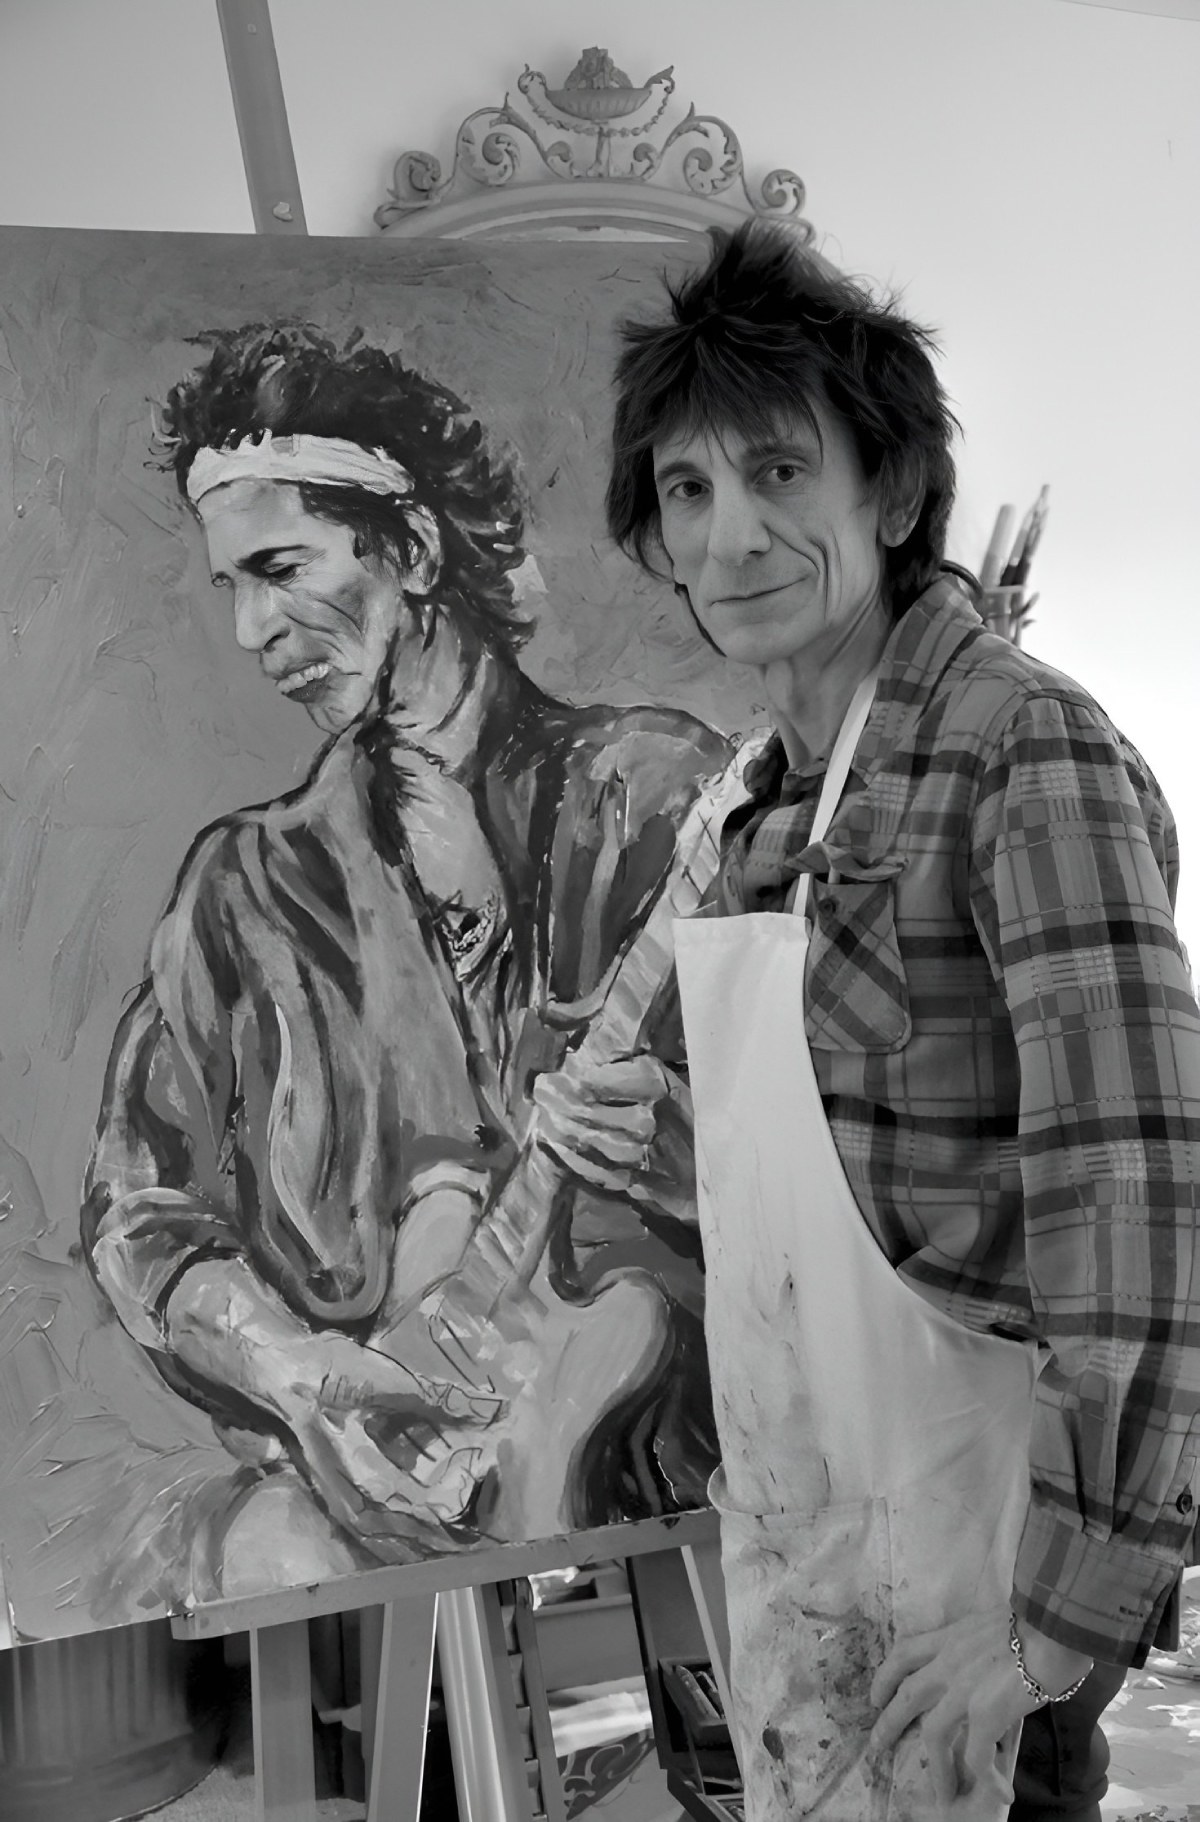 Ronnie Wood painted a portrait of Keith Richards